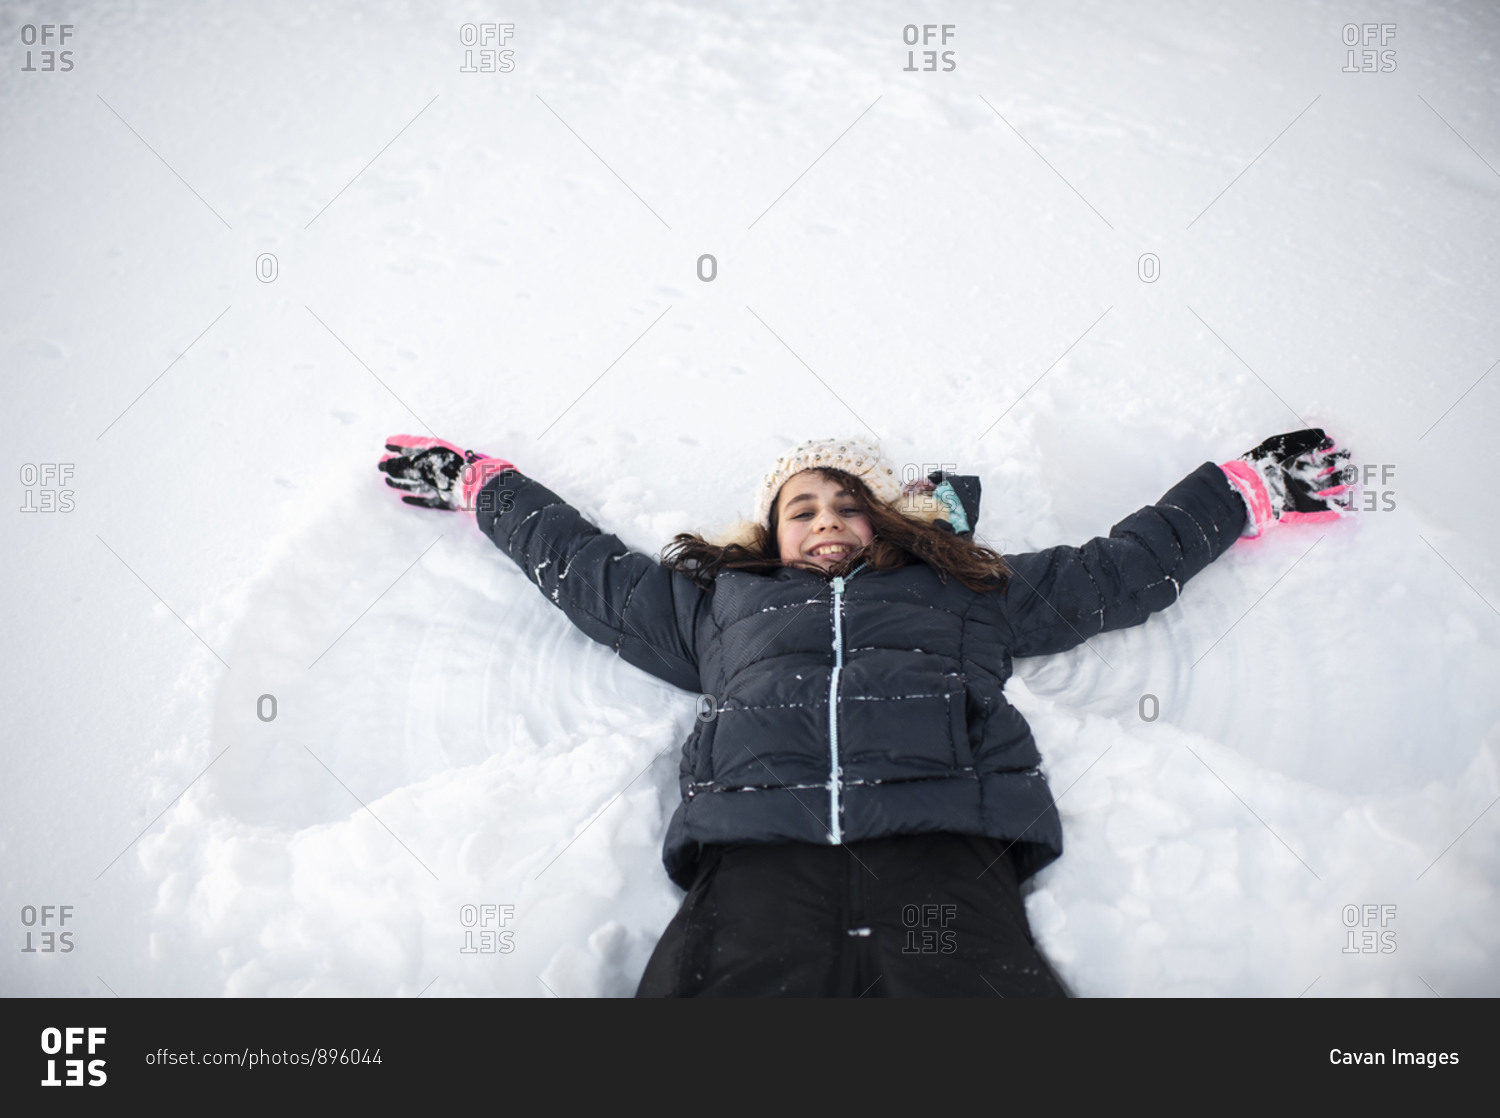 Girl smiling while making snow angel in the snow in front yard